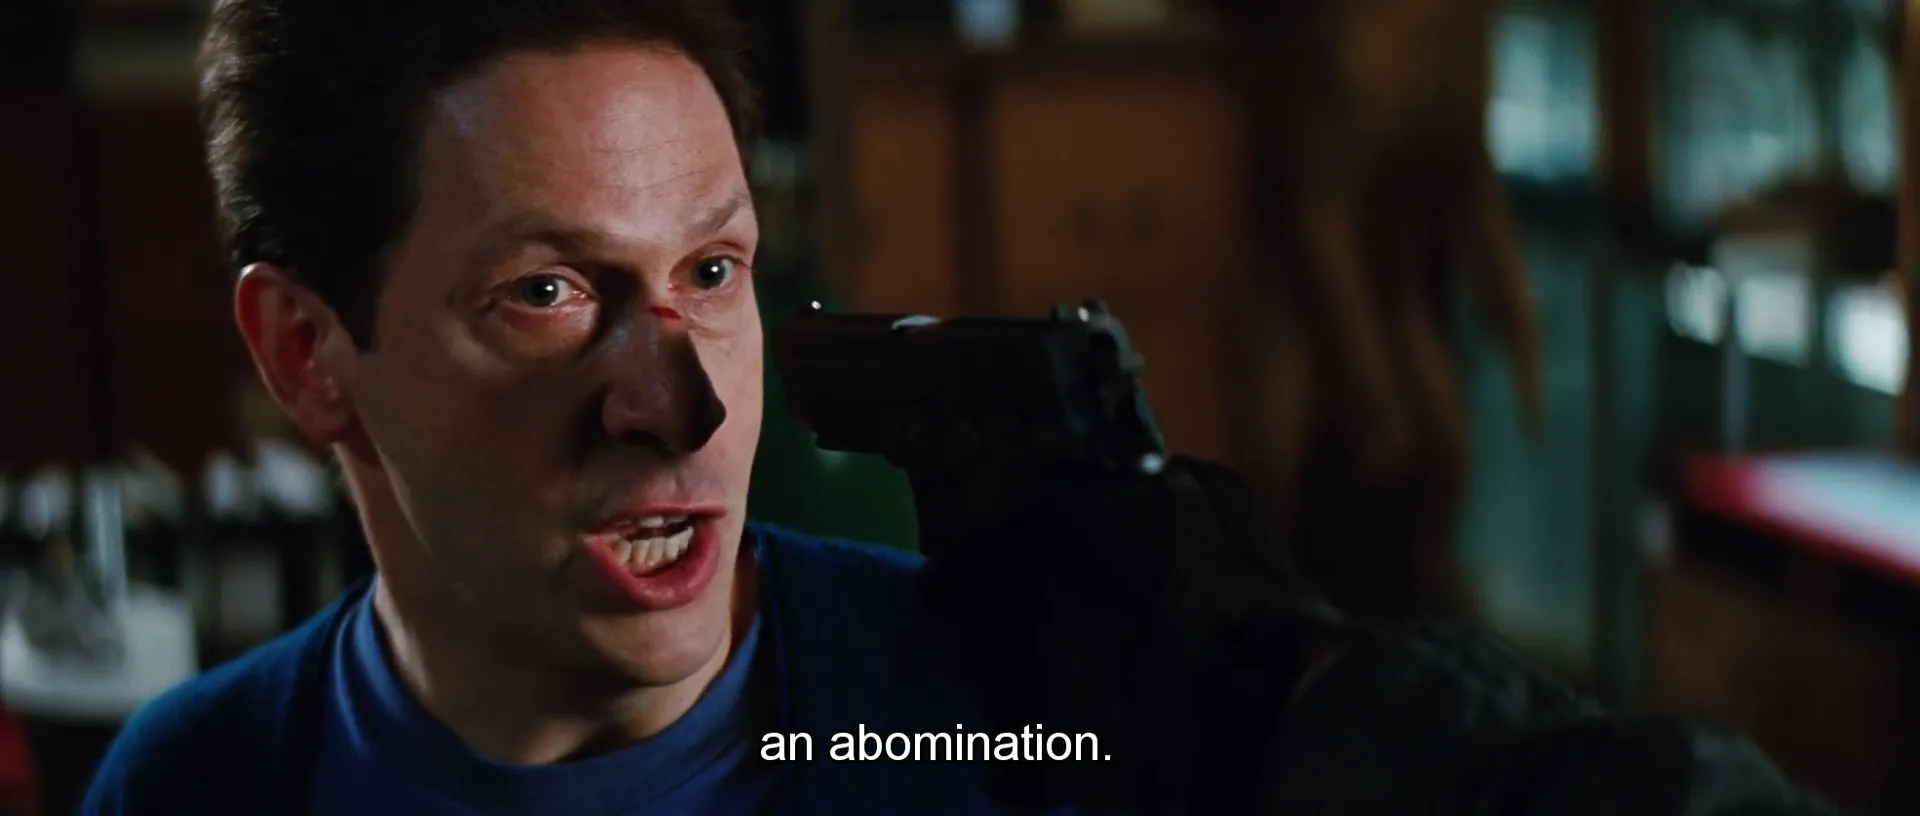 'An Abomination'